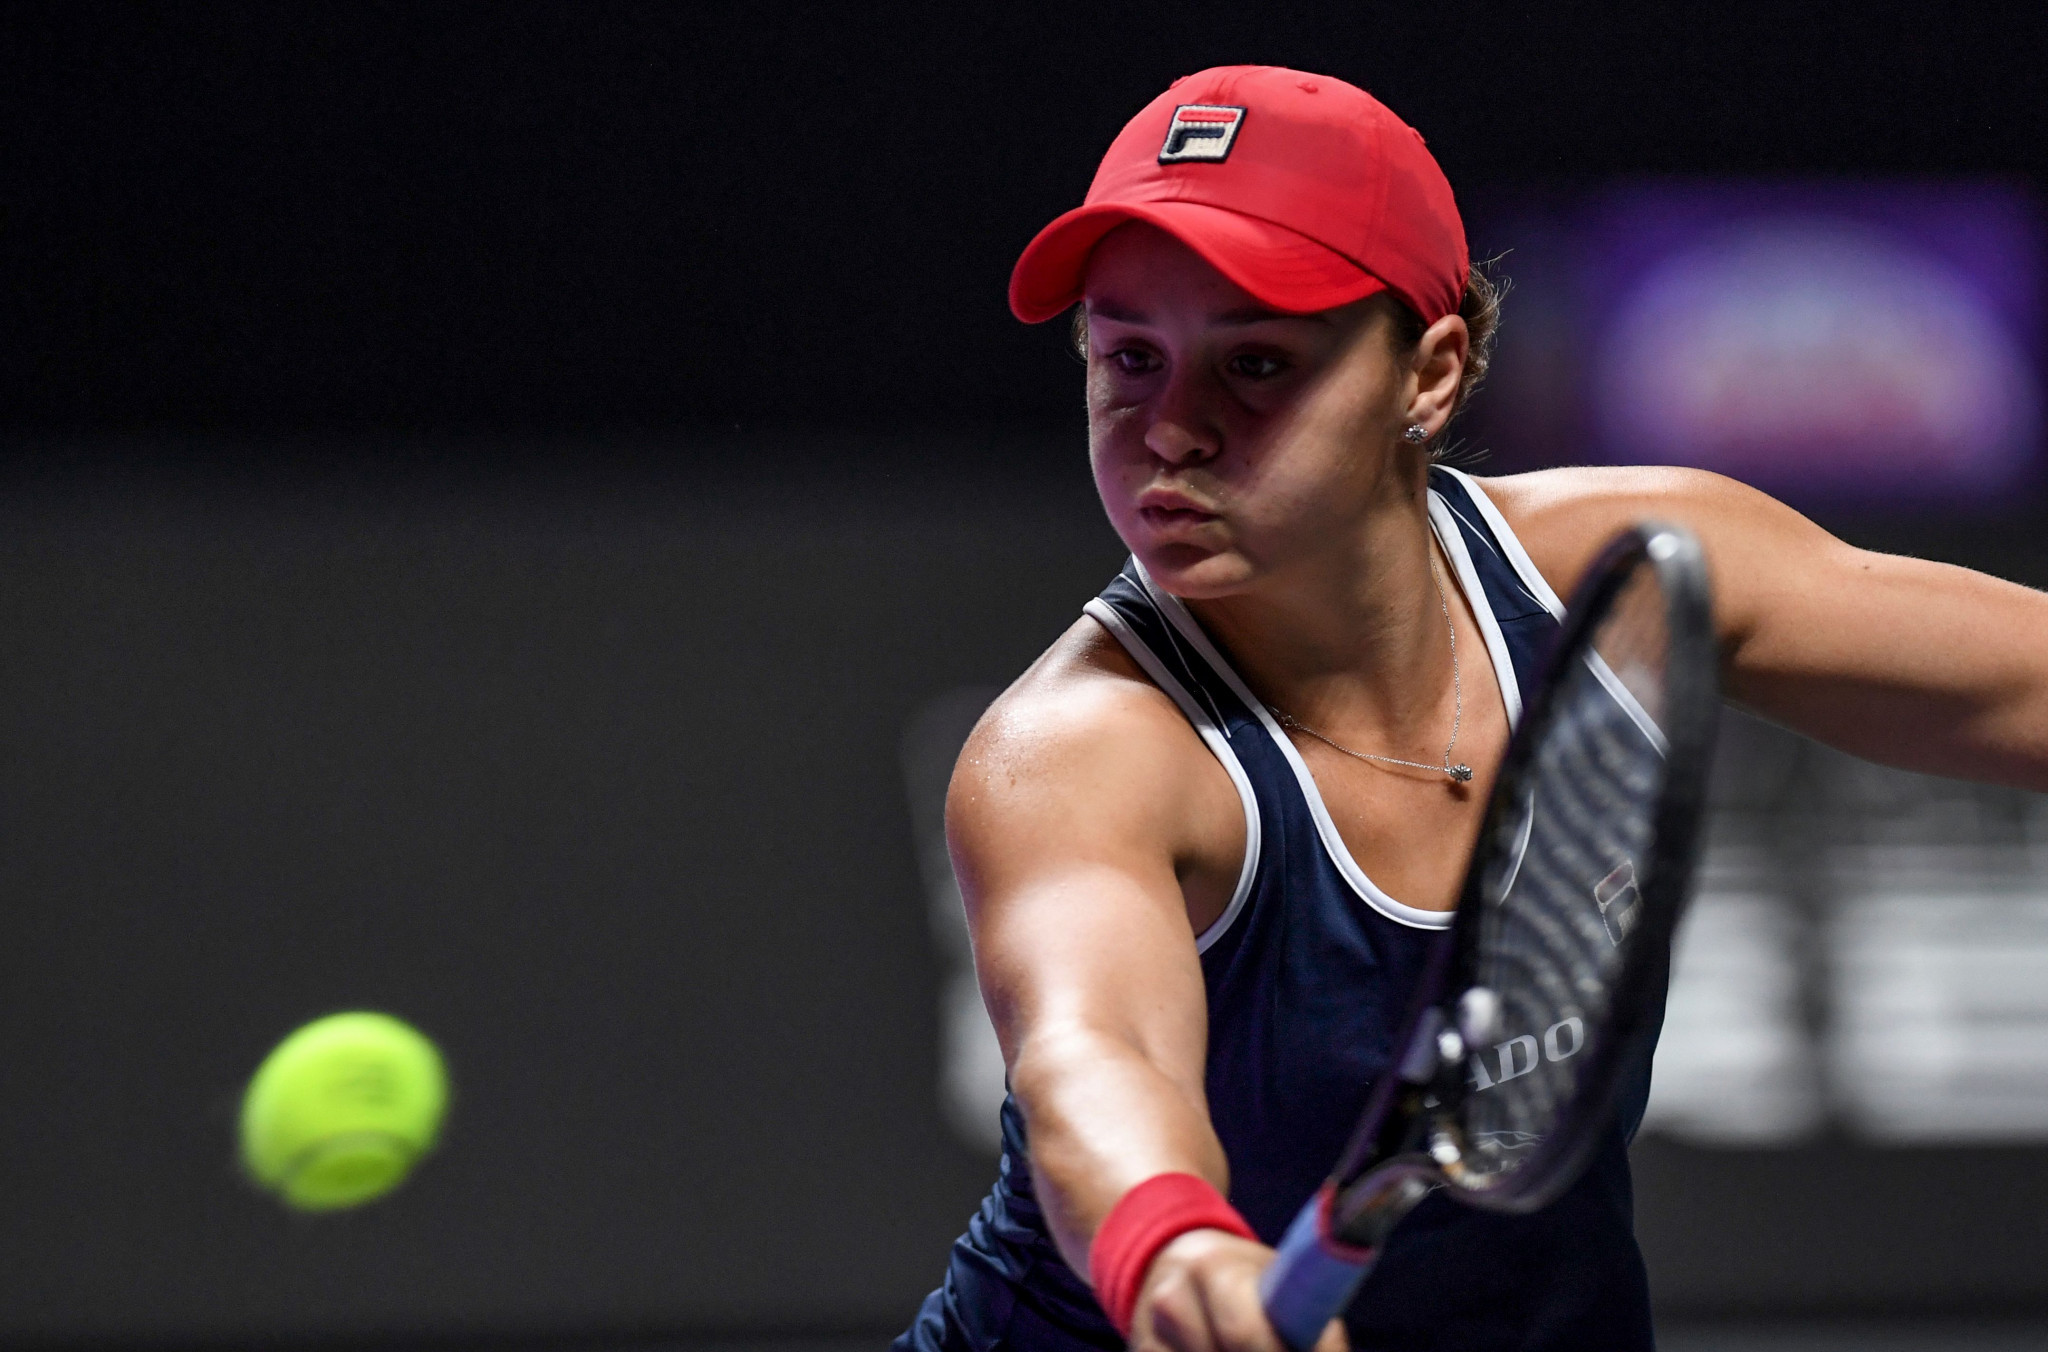 Barty and Svitolina to clash for title at WTA Finals